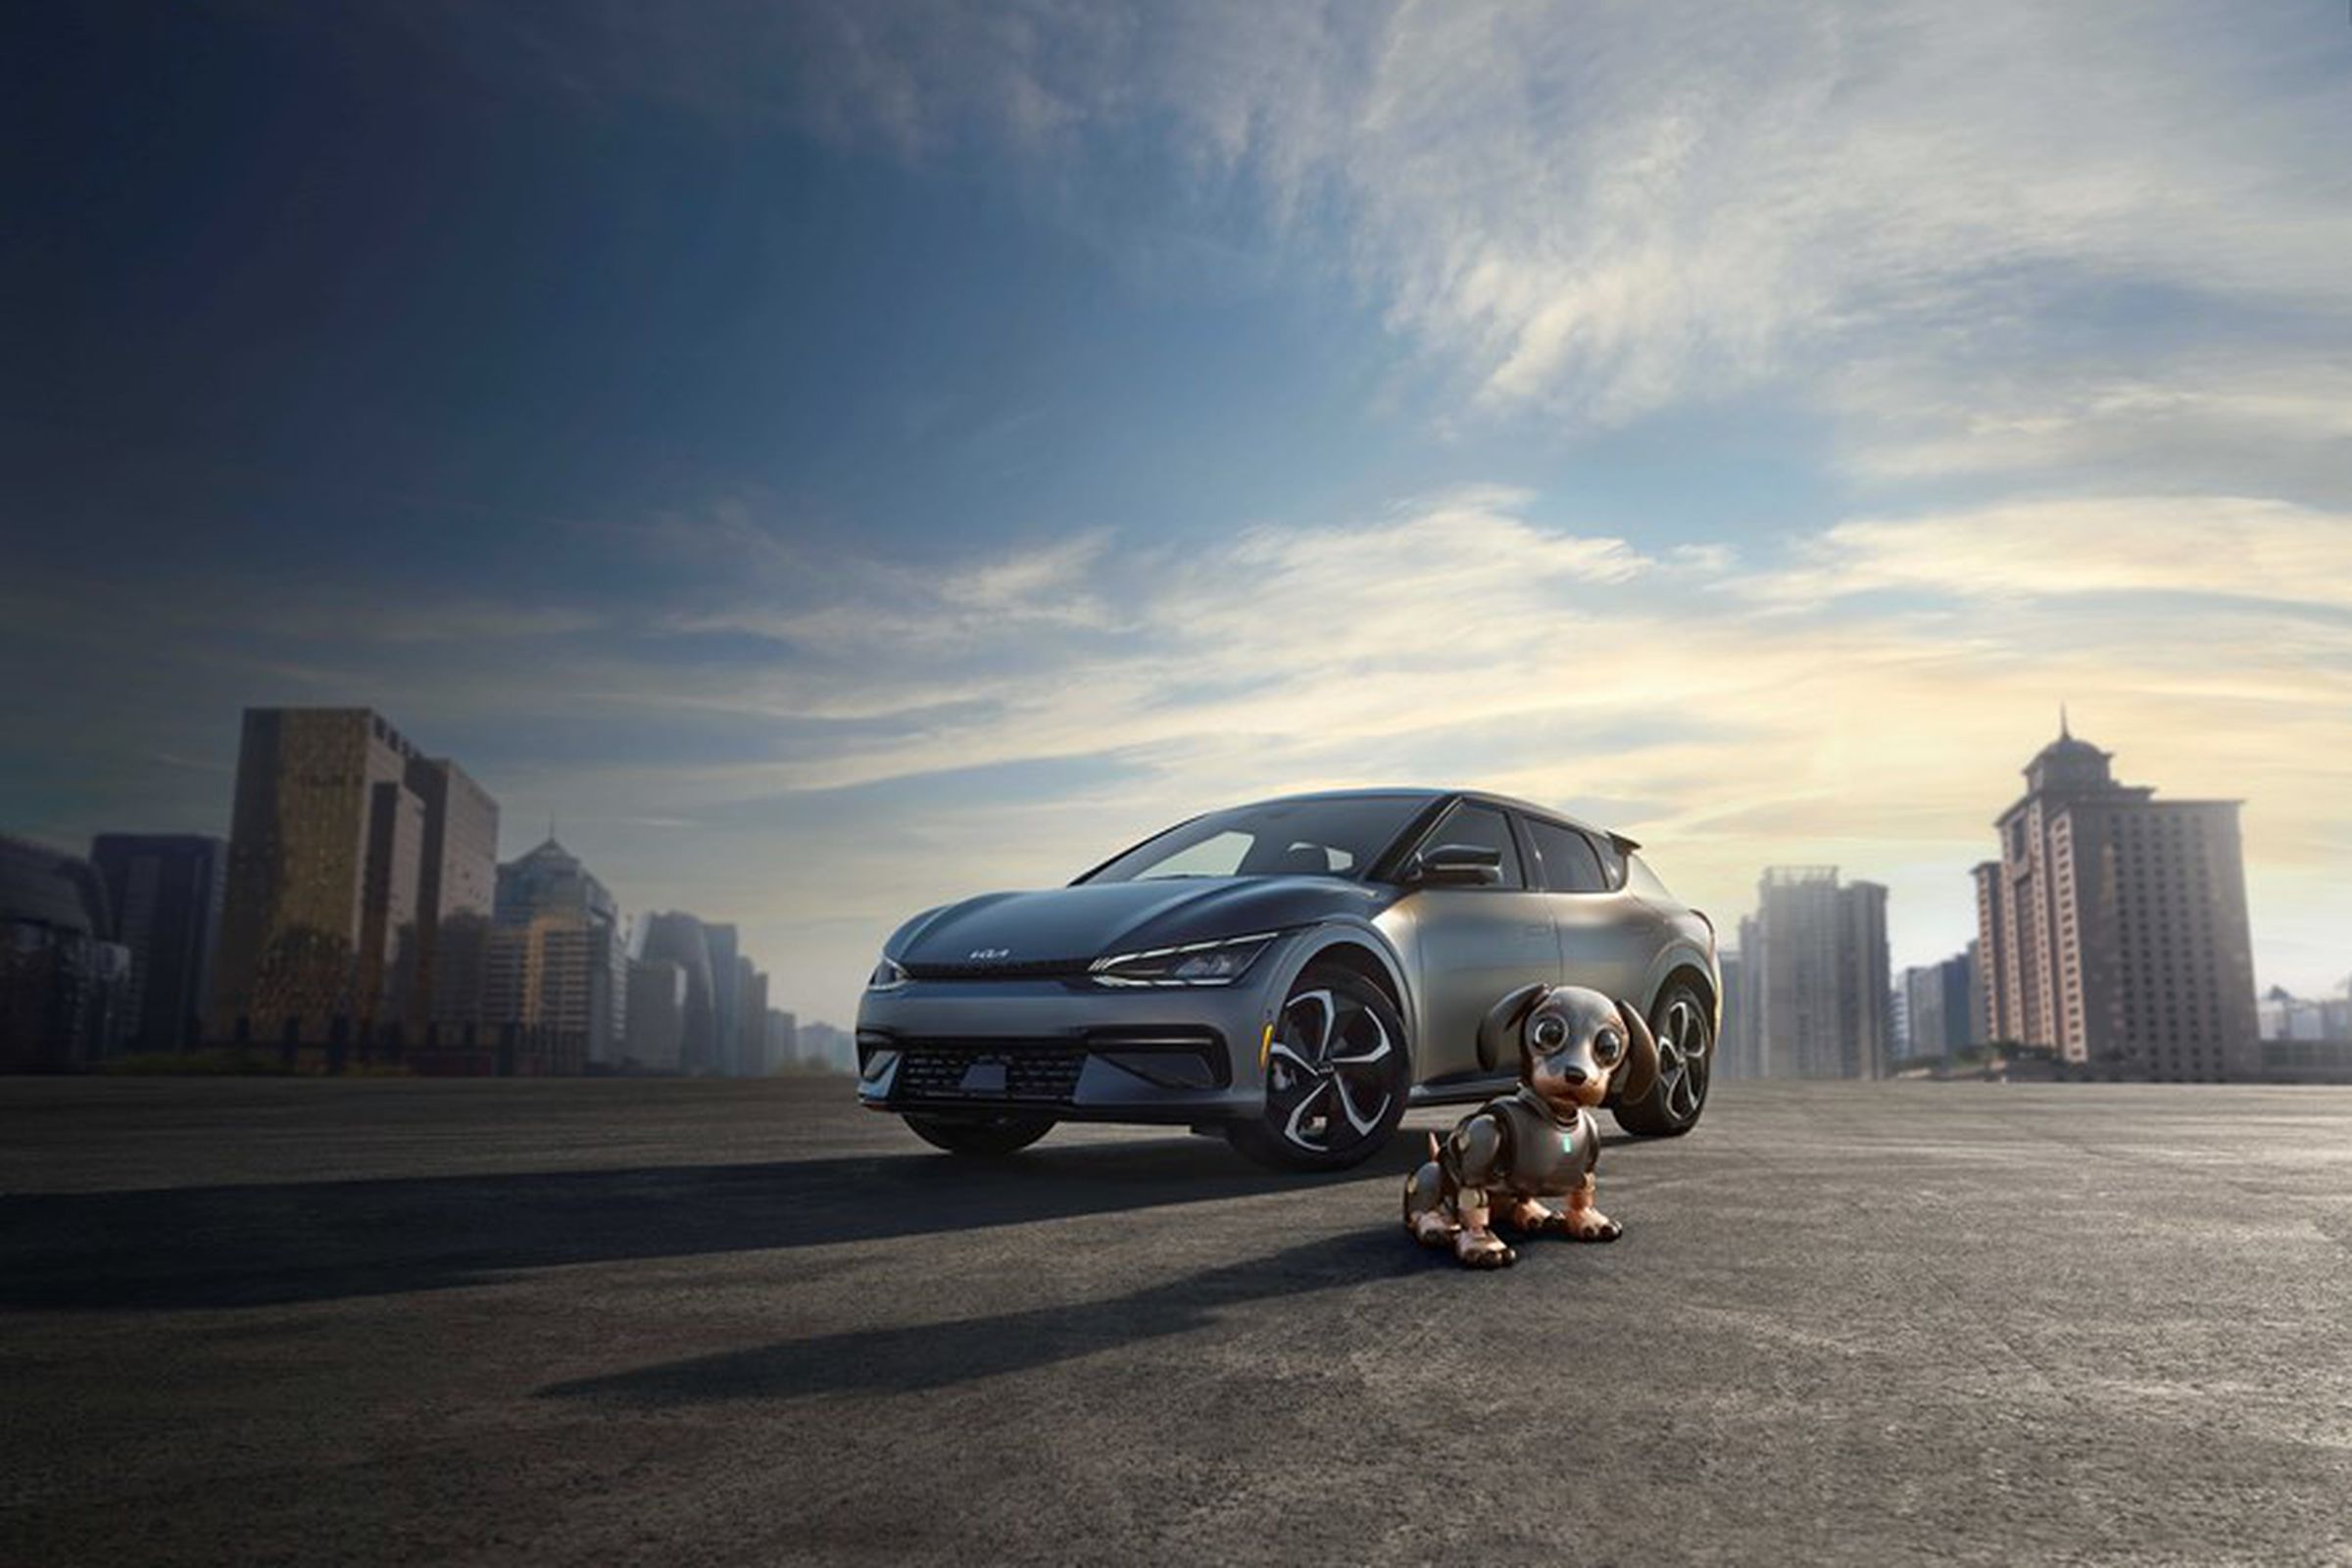 The Kia EV6 pictured with a city backdrop and small robot dog in the foreground. Kia is just starting production of the car, but it won’t be available for weeks or months to come.